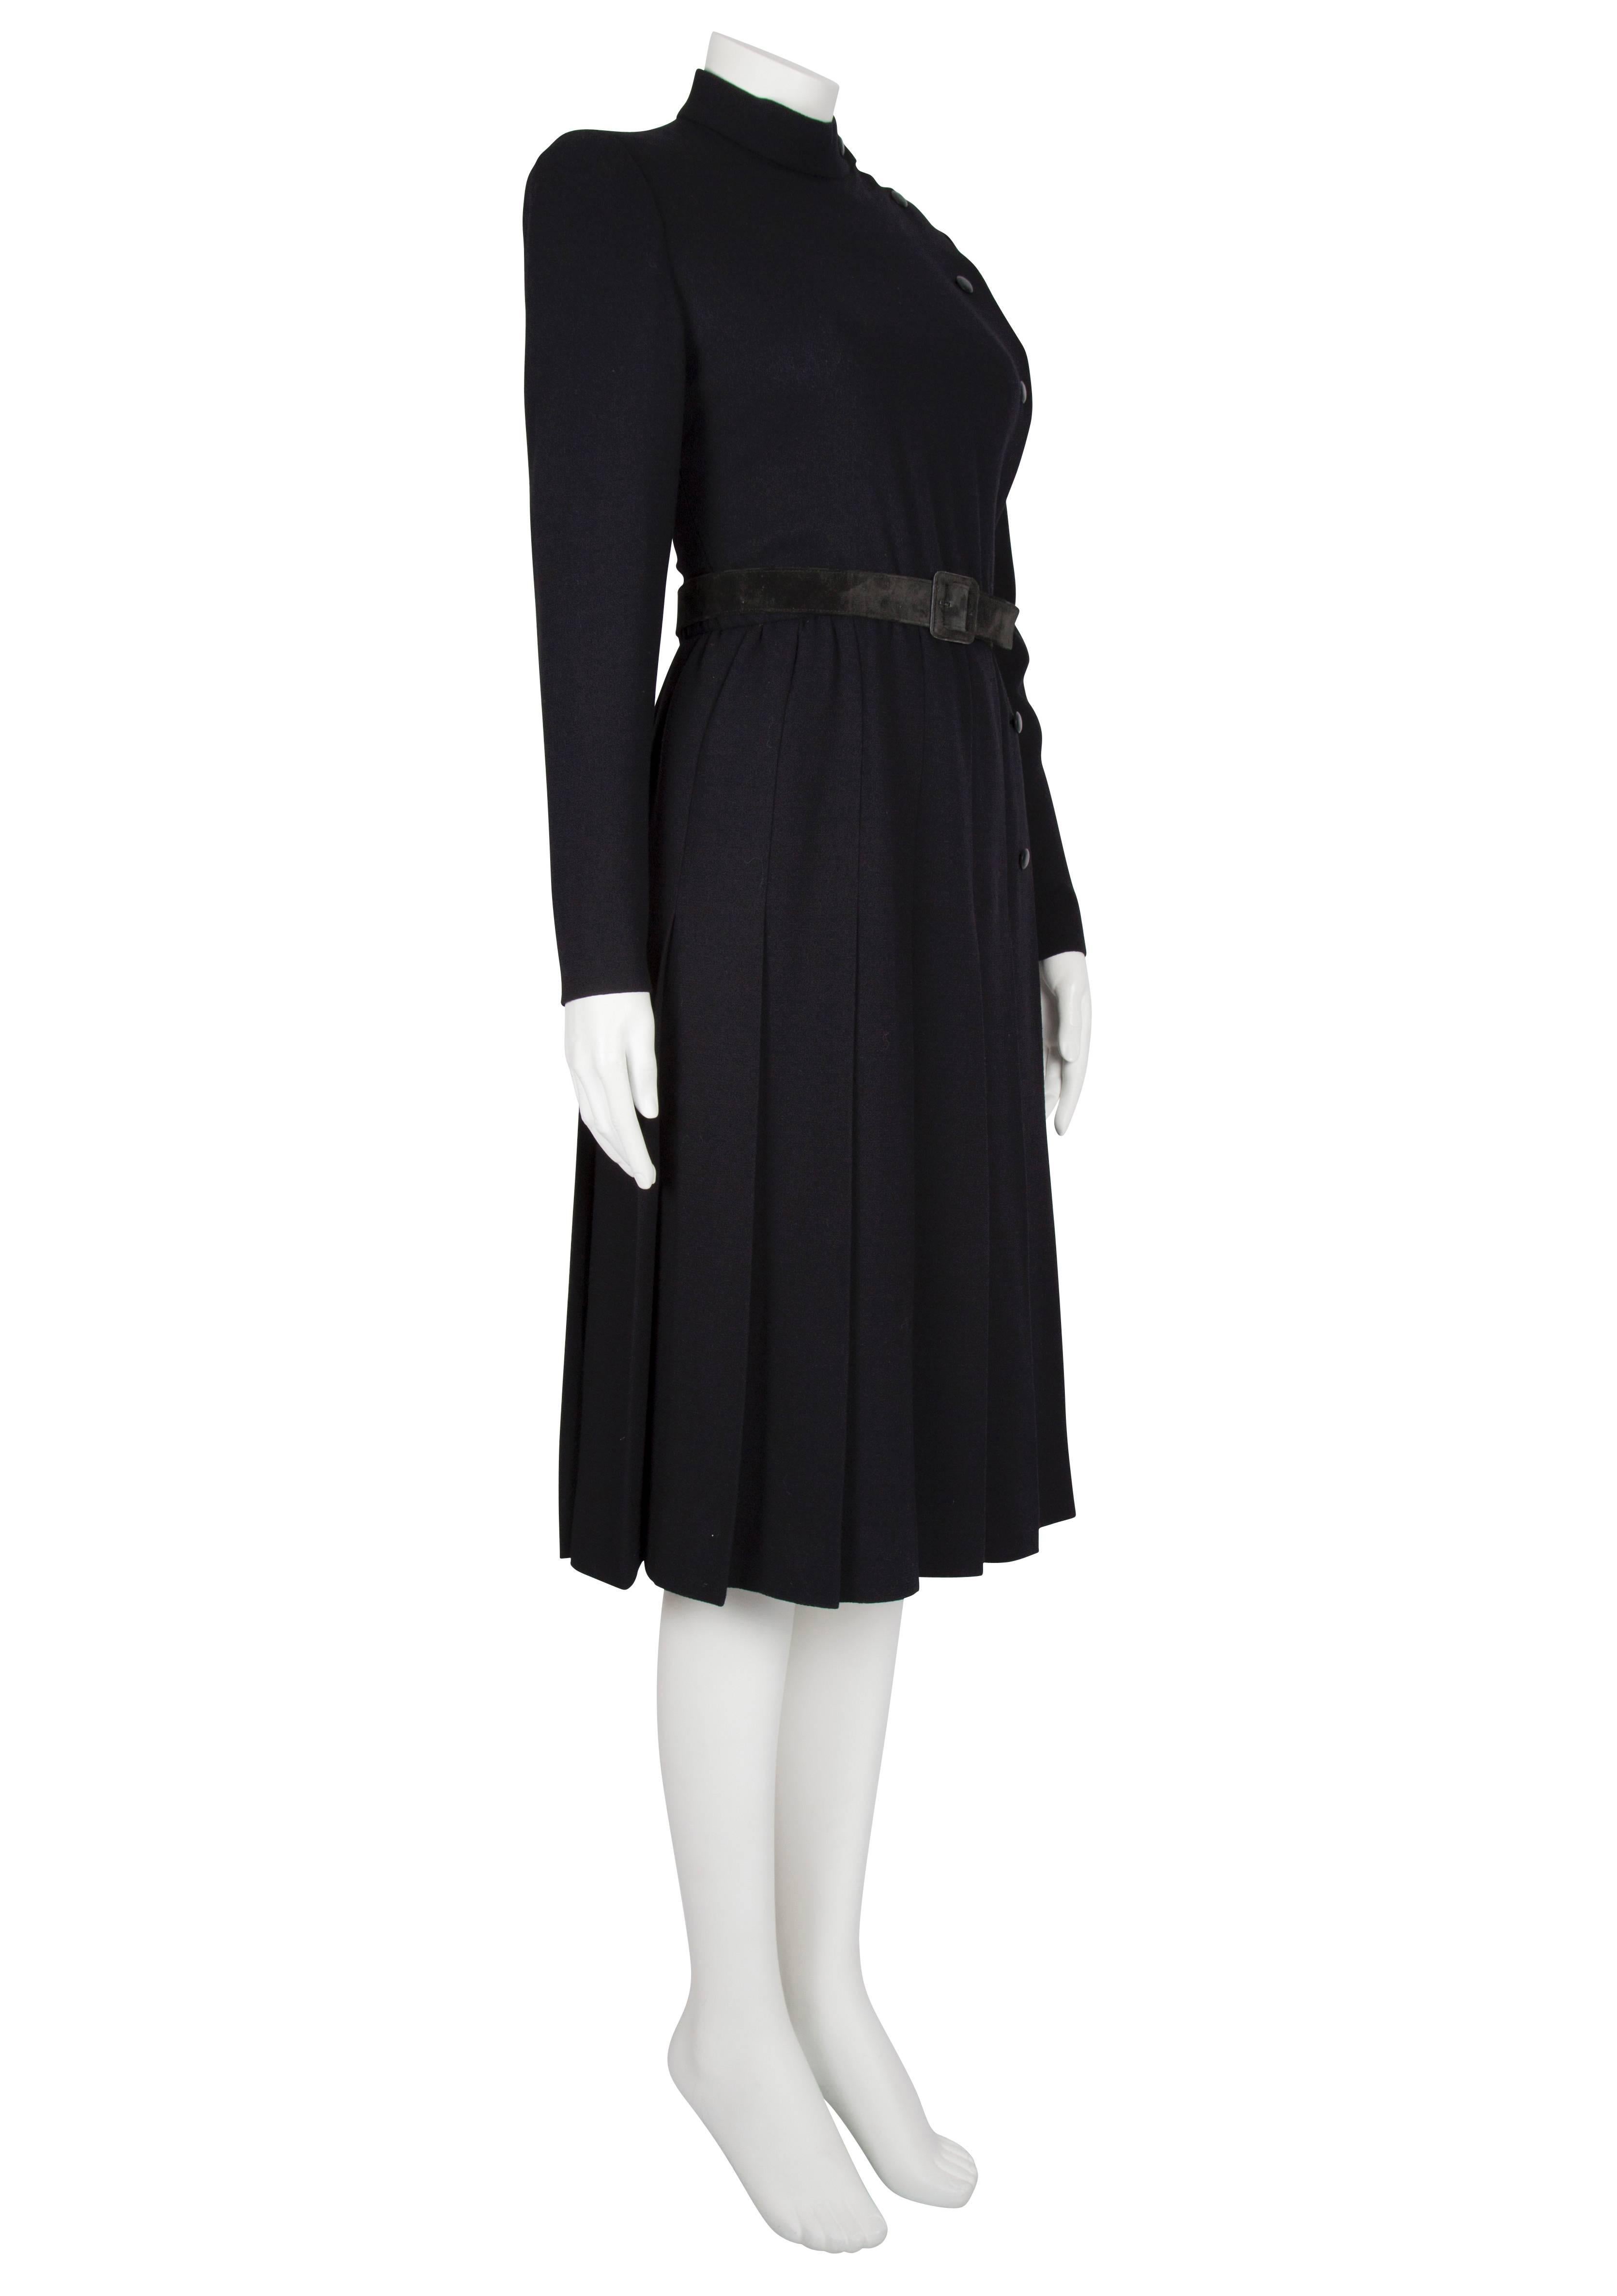 A/W 1979 Dior Couture Black Silk Crepe Button-Down Wrap Dress with Suede Belt For Sale 1